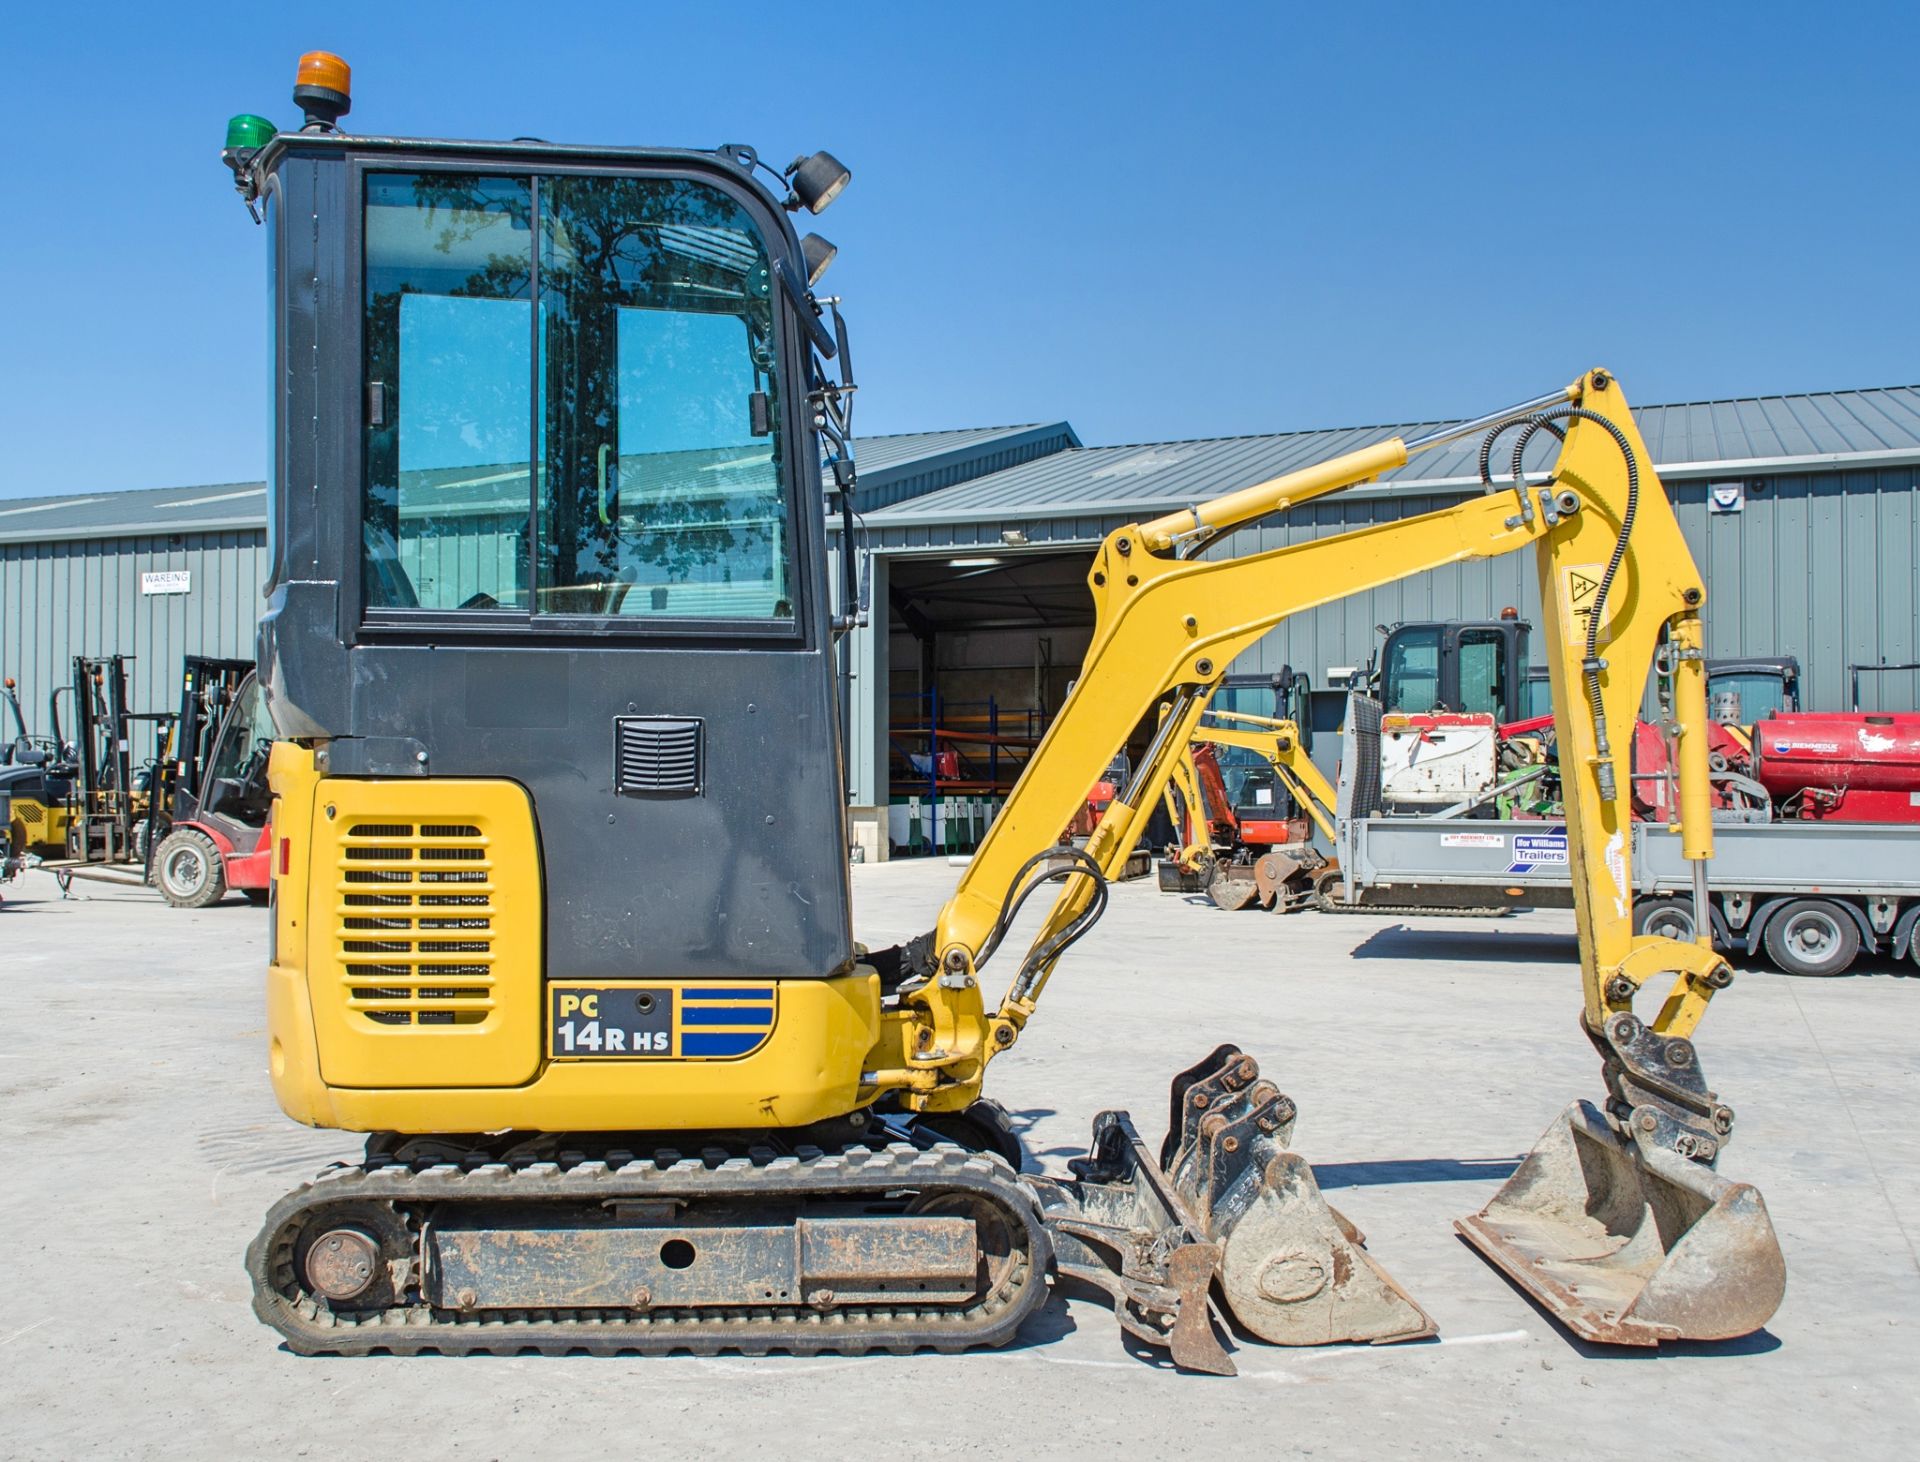 Komatsu PC14R-3HS 1.5 tonne rubber tracked mini excavator Year: 2019 S/N: 50697 Recorded hours: - Image 8 of 21